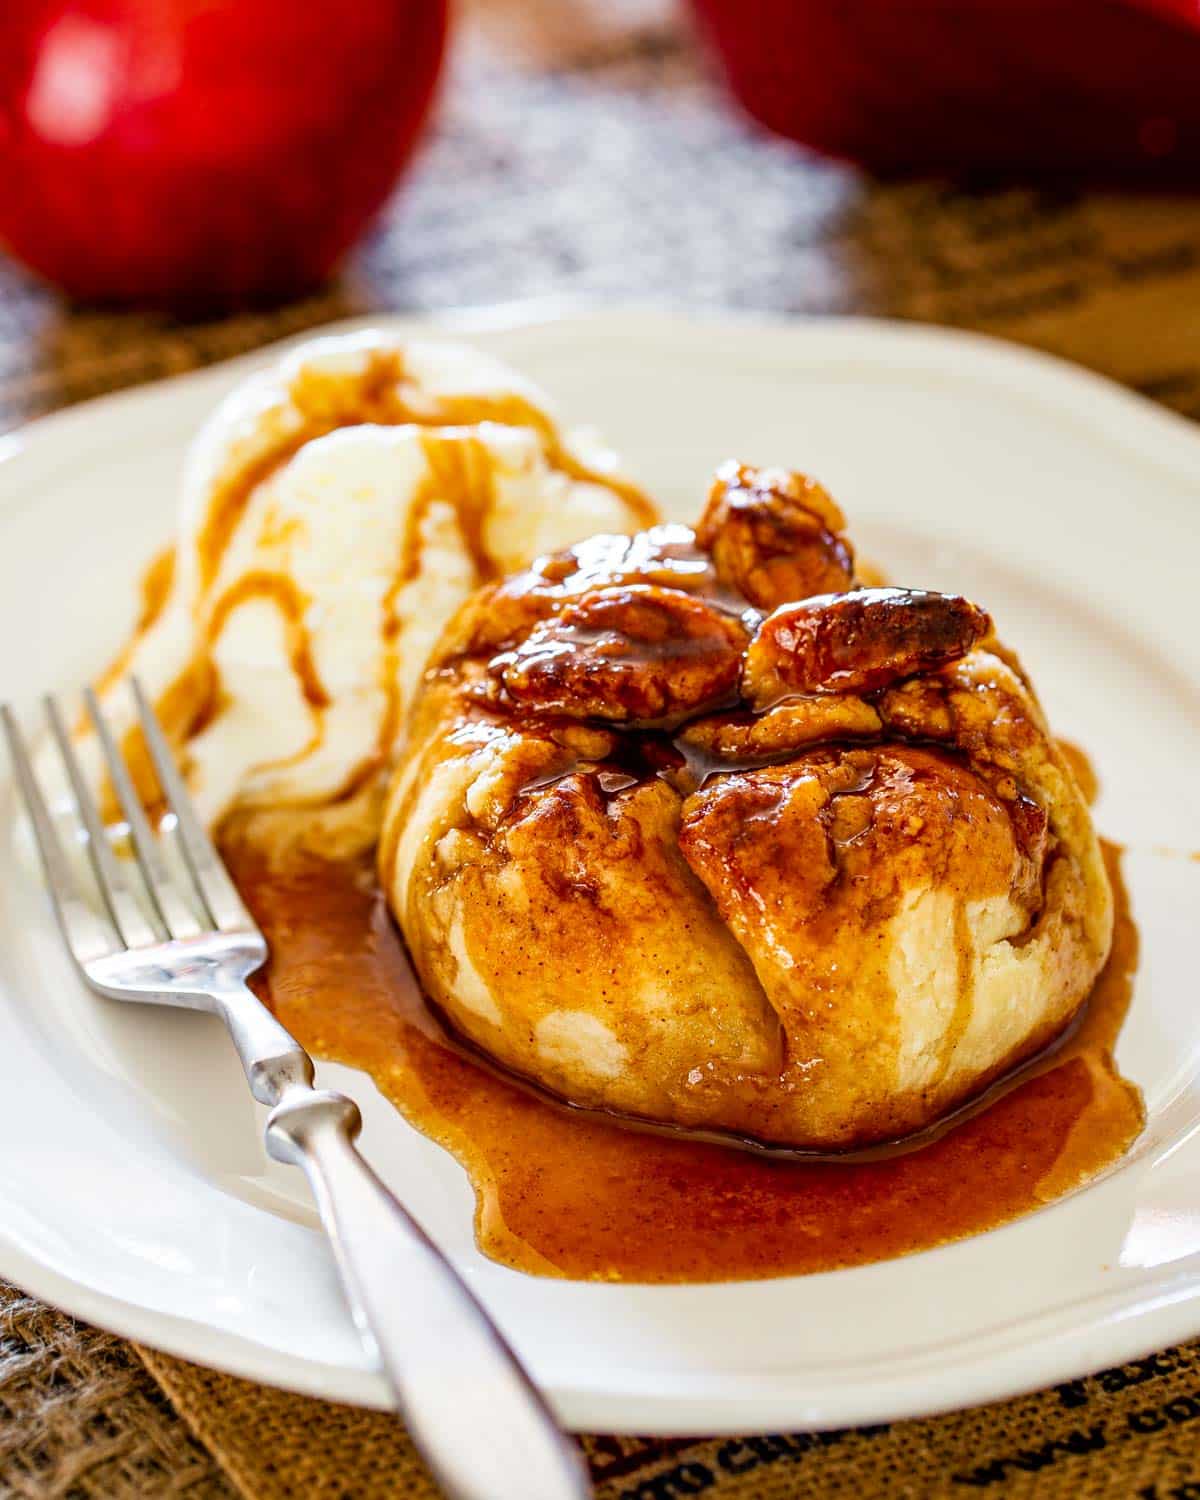 an apple dumpling with a tasty syrup drizzled over it and a scoop of ice cream in white plate